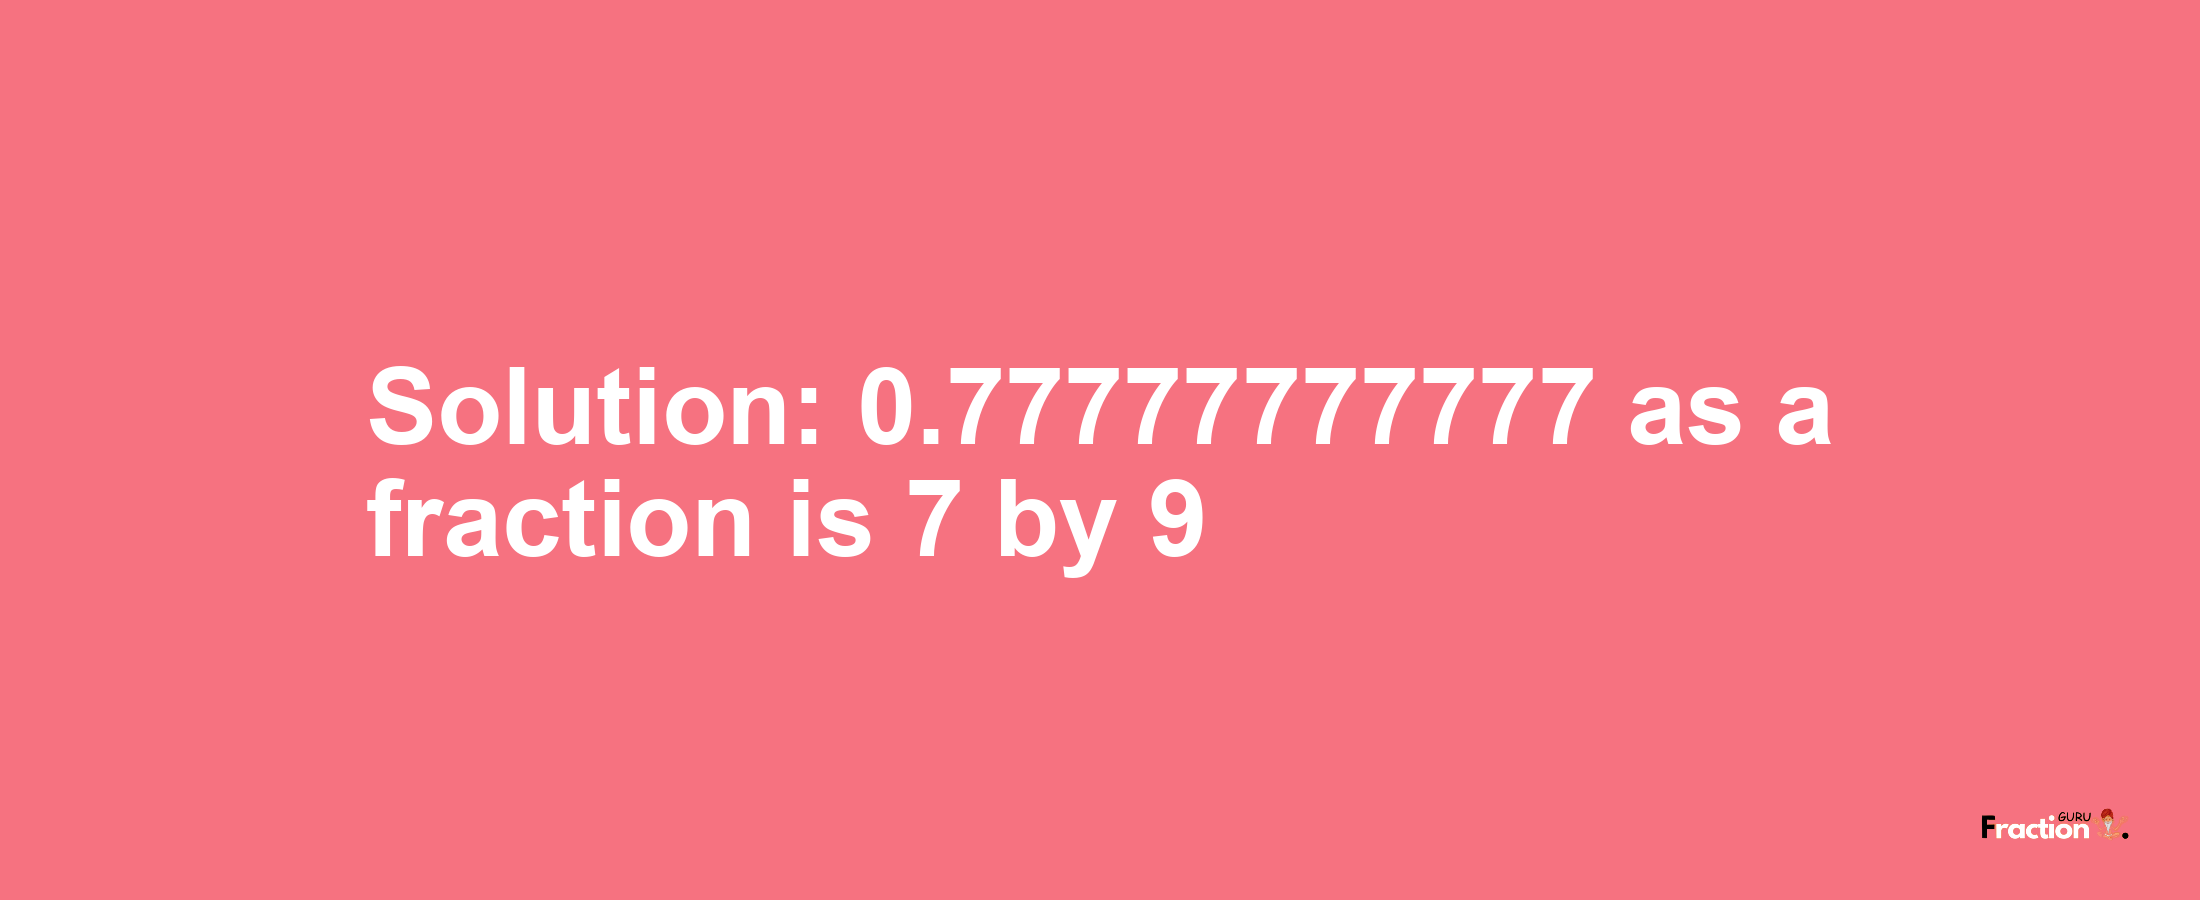 Solution:0.77777777777 as a fraction is 7/9